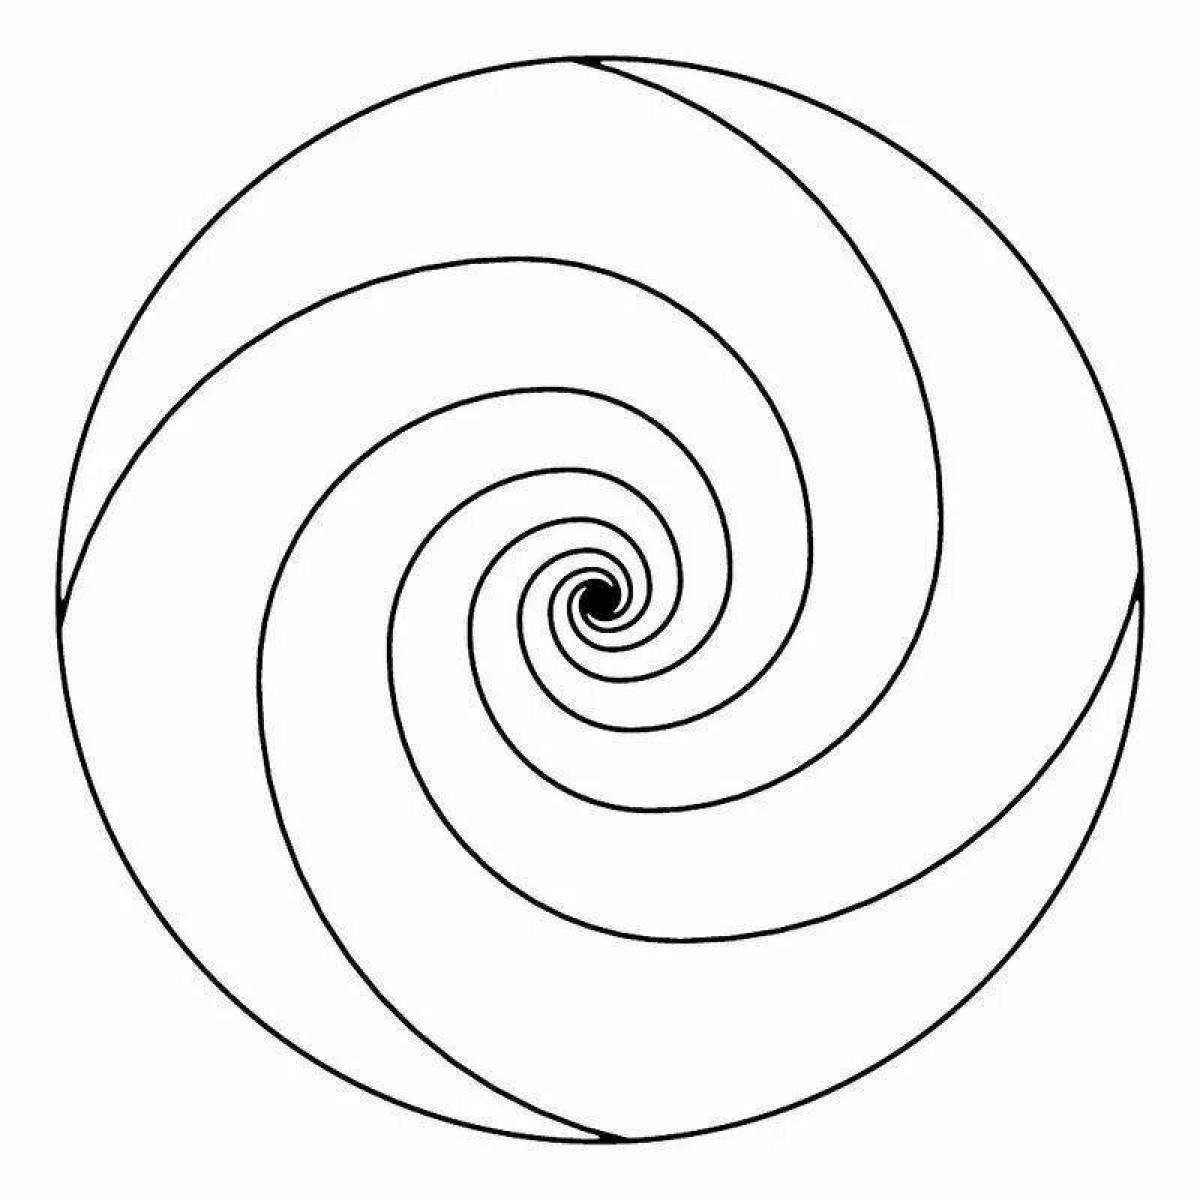 Creating a fun spiral coloring page